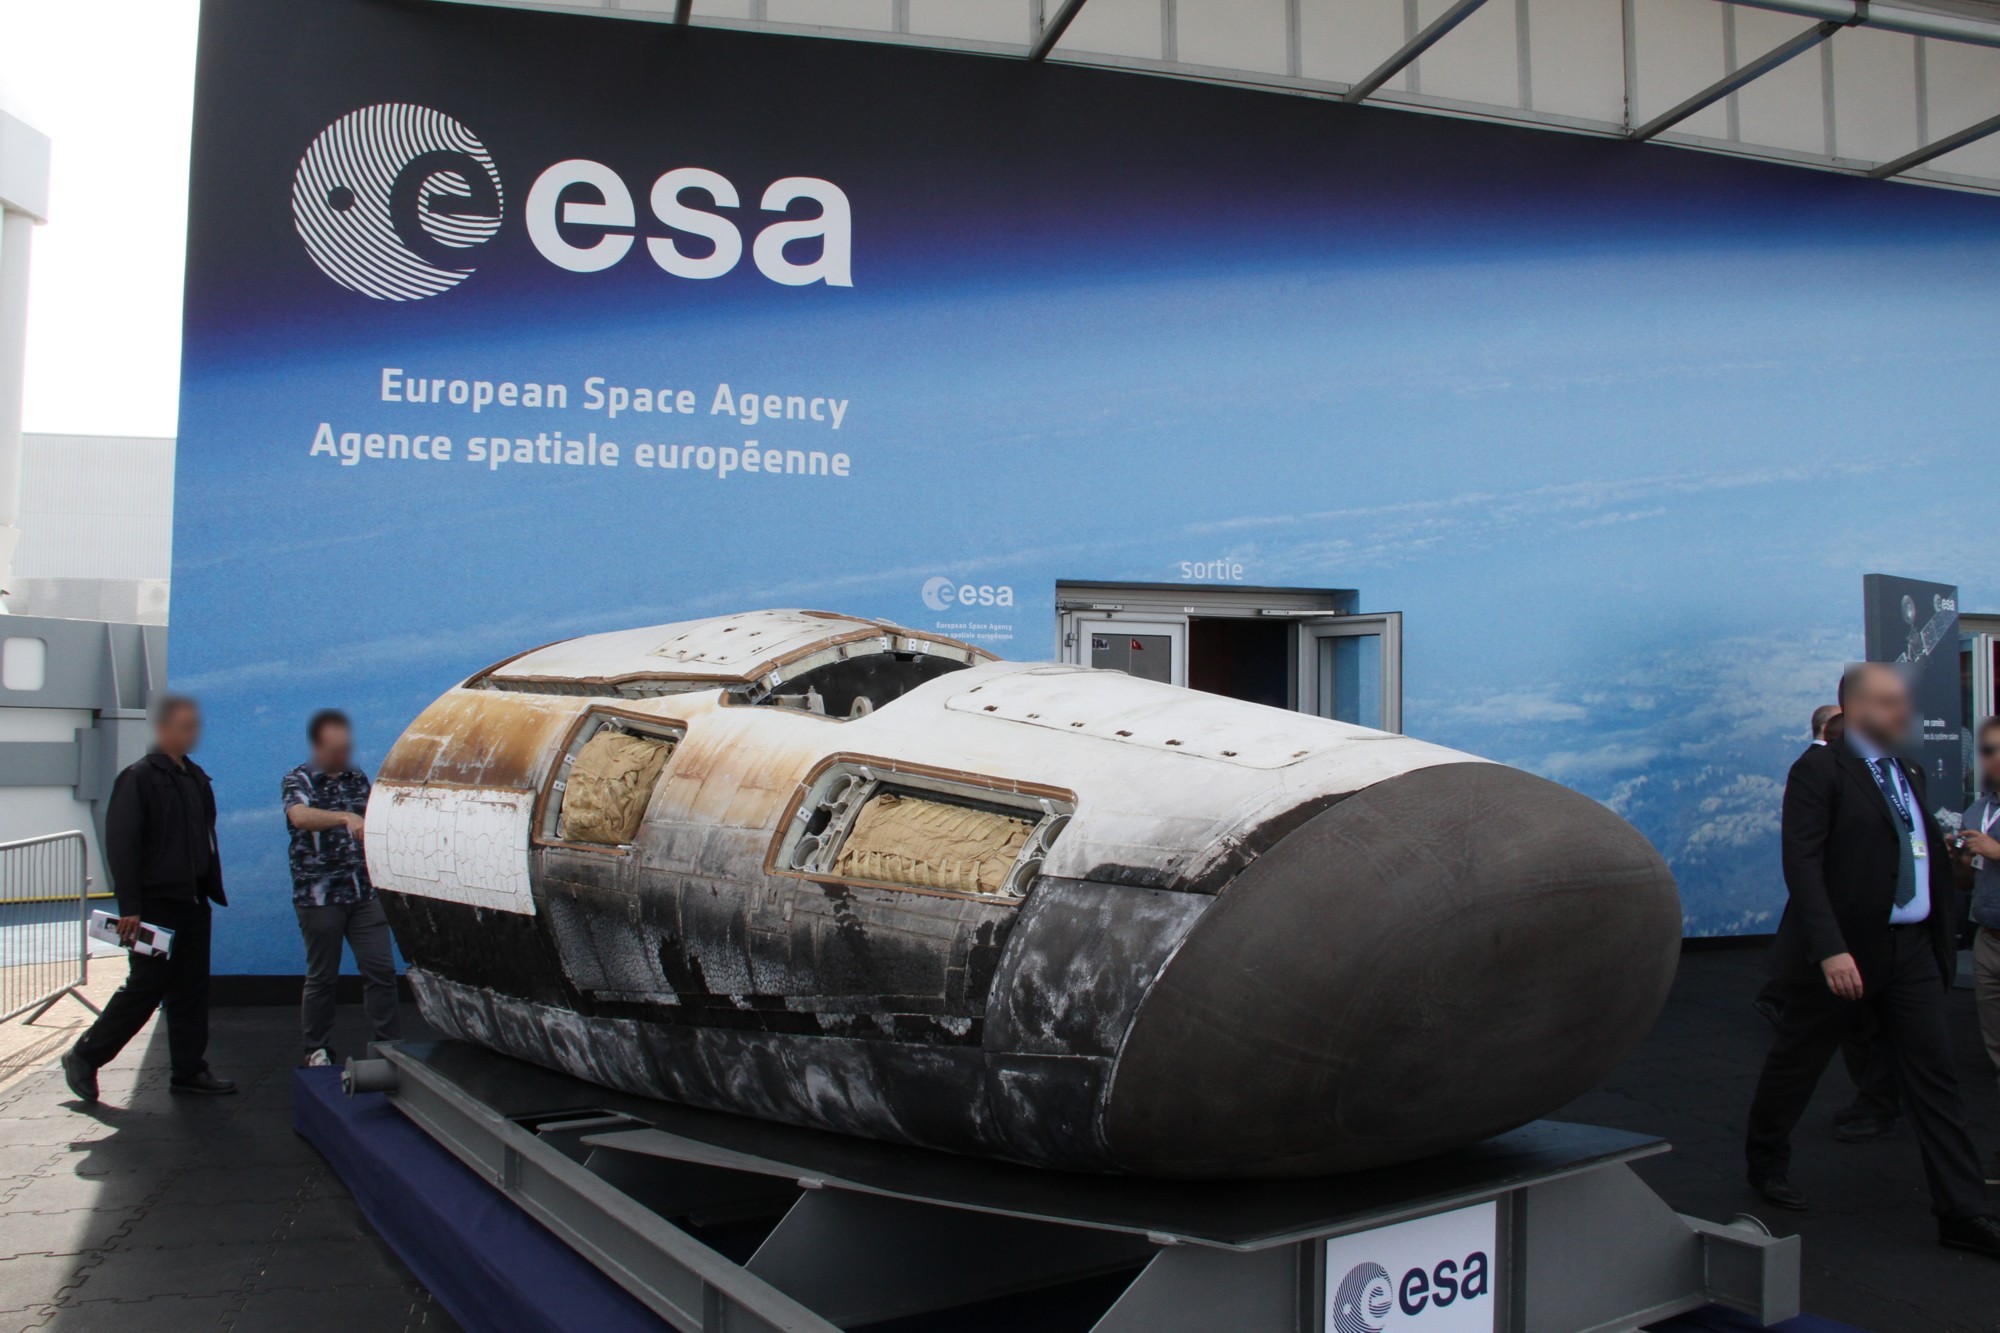 15 06 16 - 10h 53m 43s - bourget esa ixv r